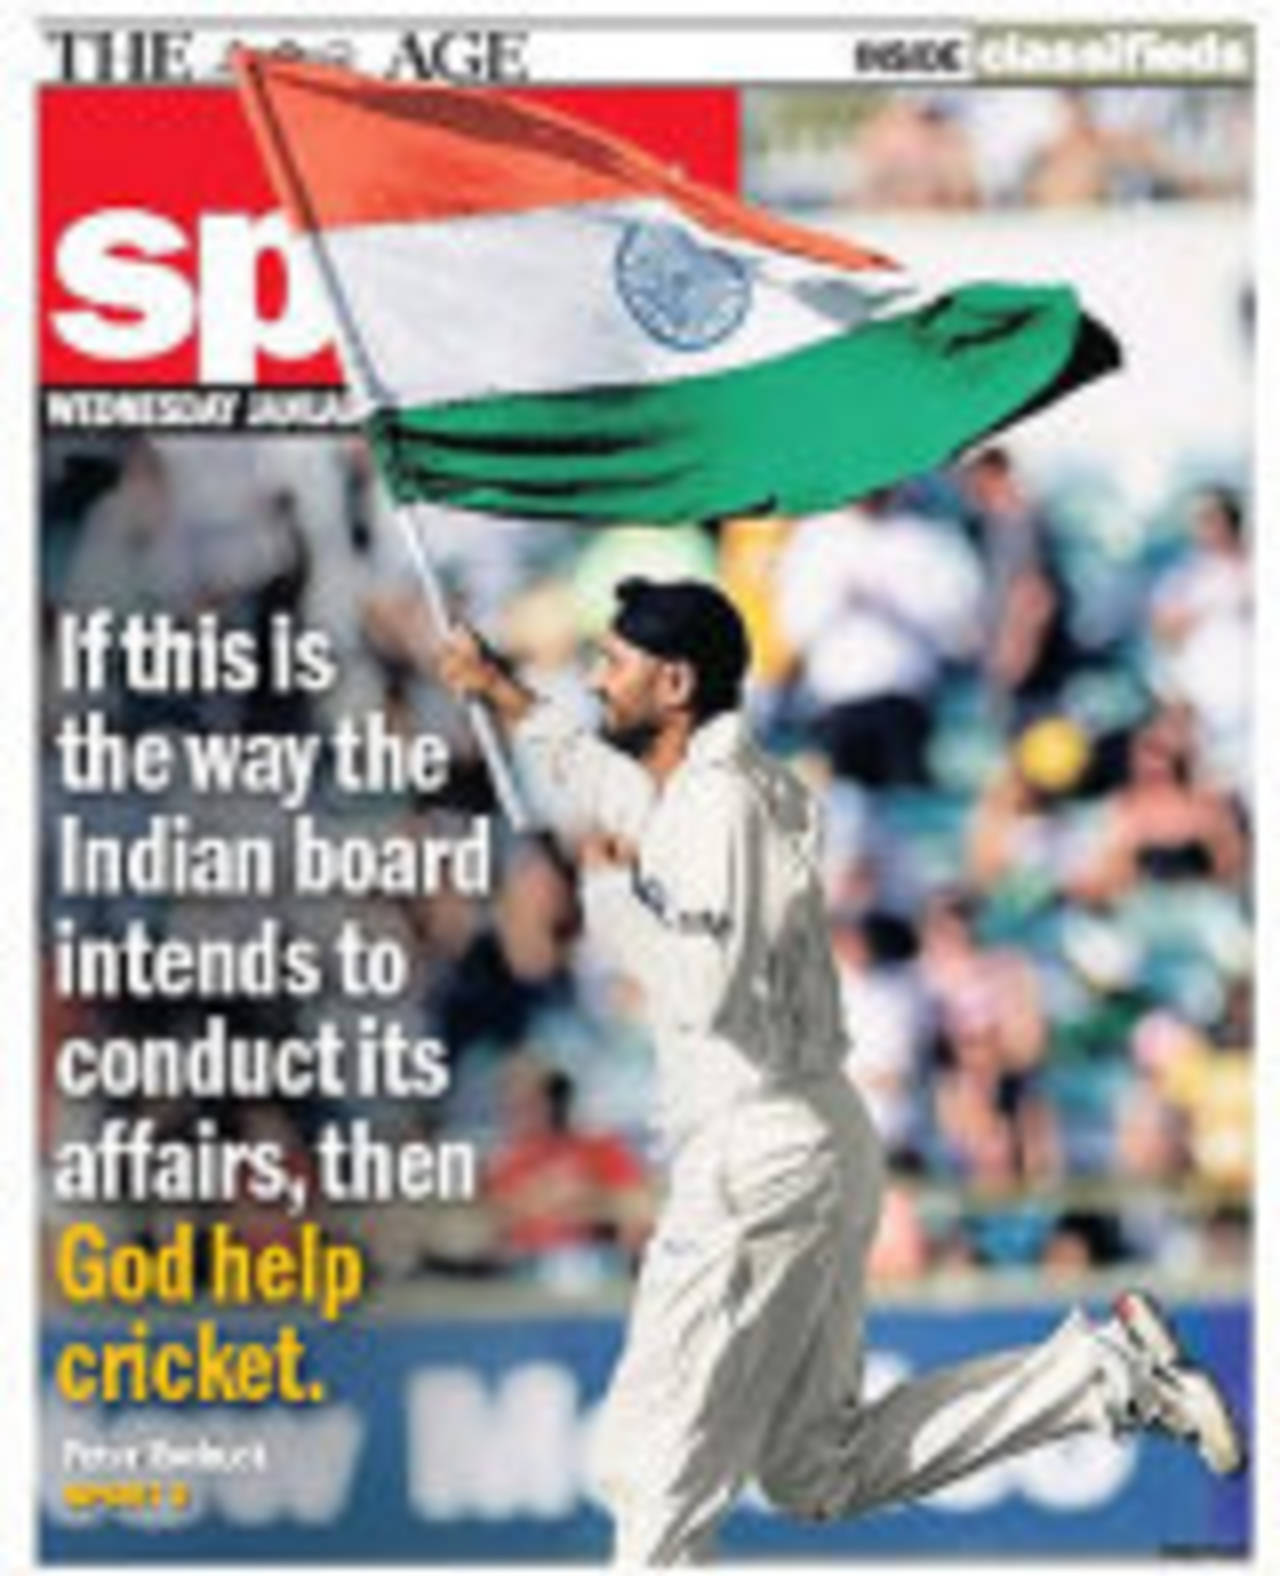 The front of the <I>Age's</I> sport pages, January 30, 2008